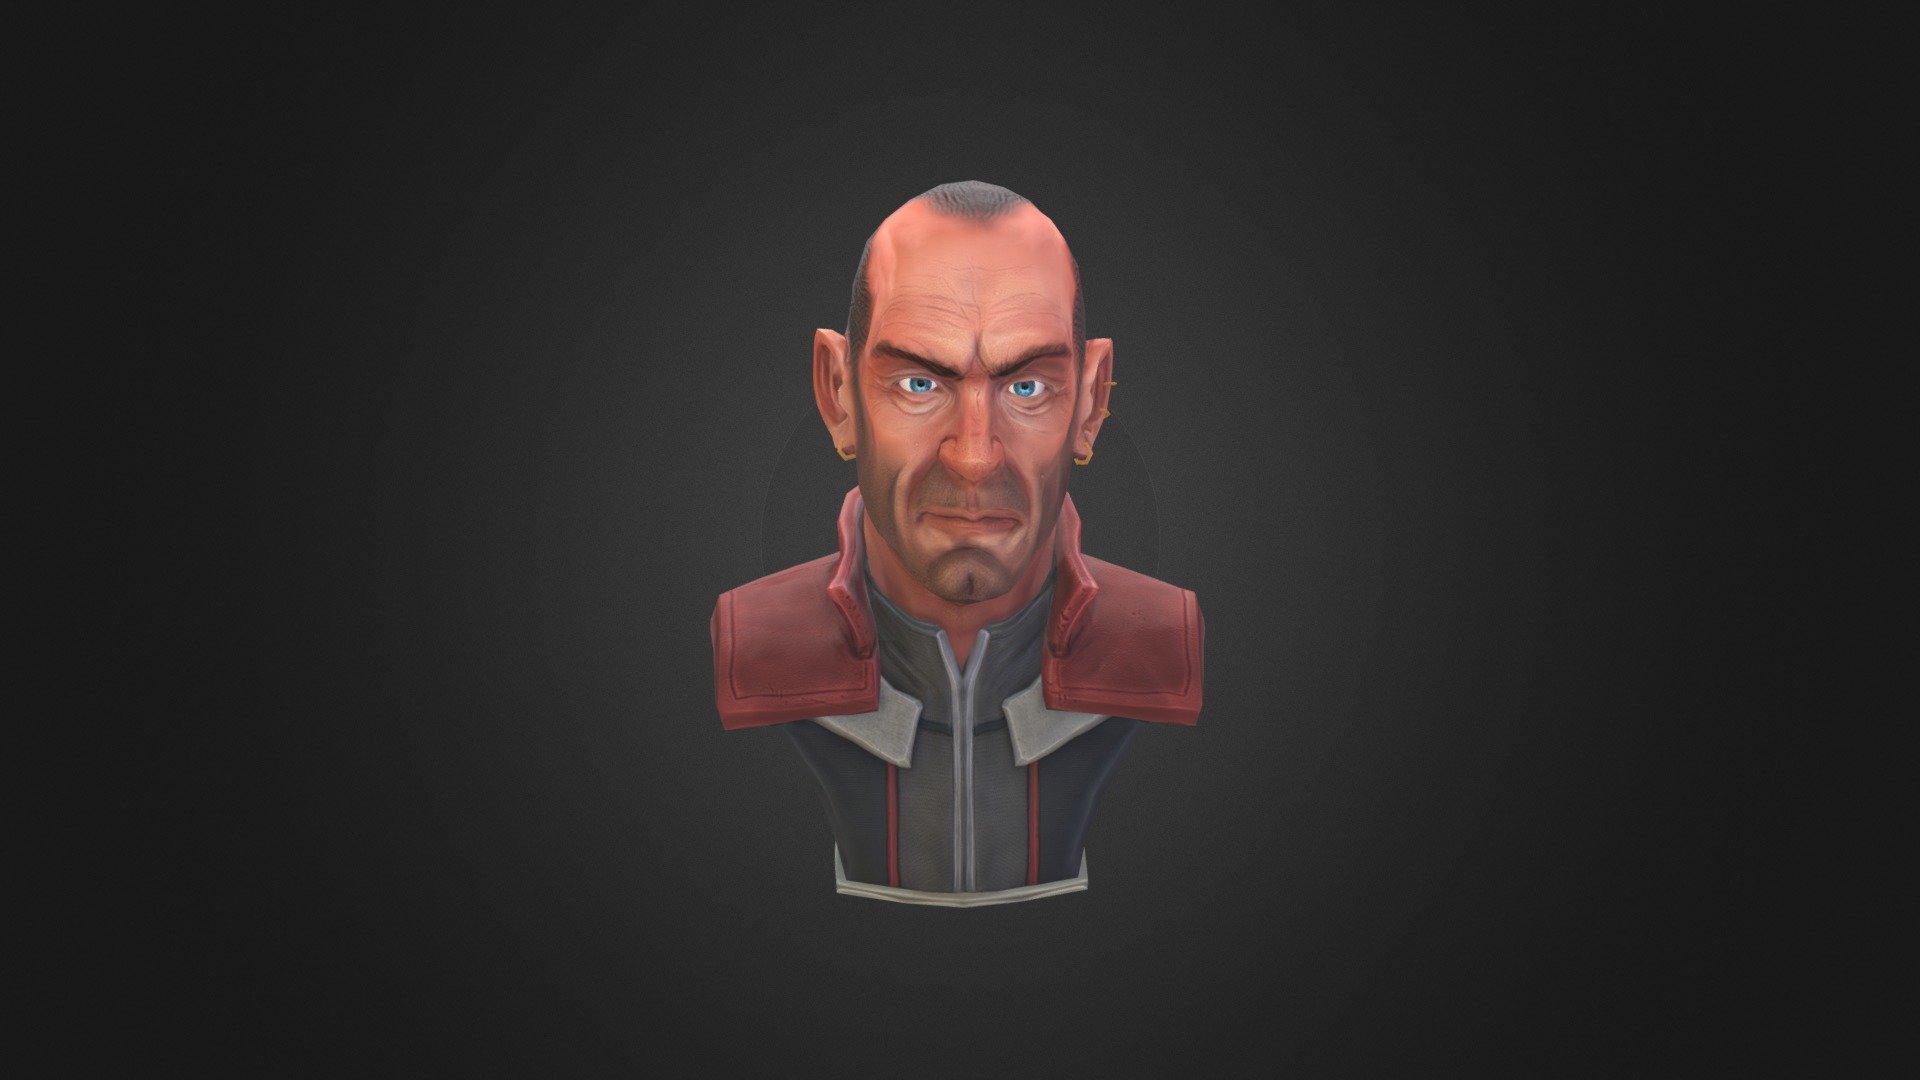 Low poly bust trying to achieve a semirealistic video game look. Highly influenced by Dishonored!

You can see the breakthrough here - Lieutenant - 3D model by mariomanzanares 3d model